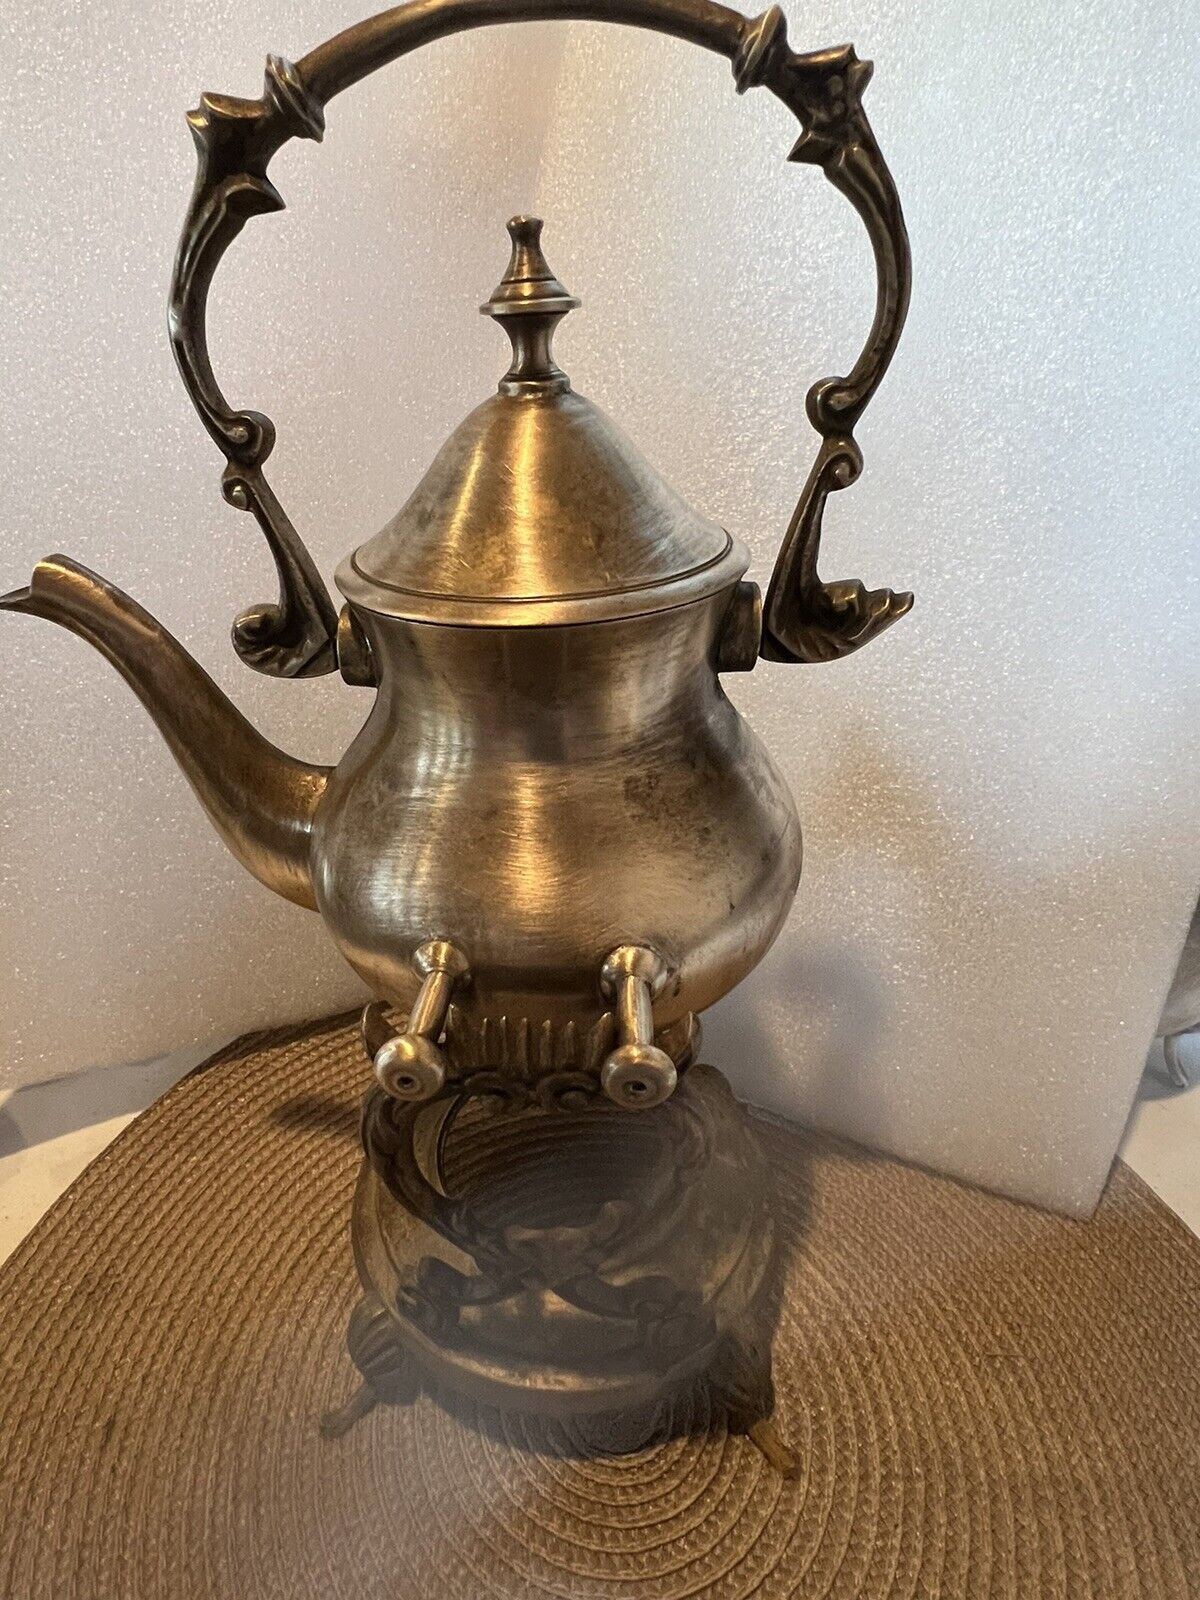 RARE vintage brass tipping teapot with stand